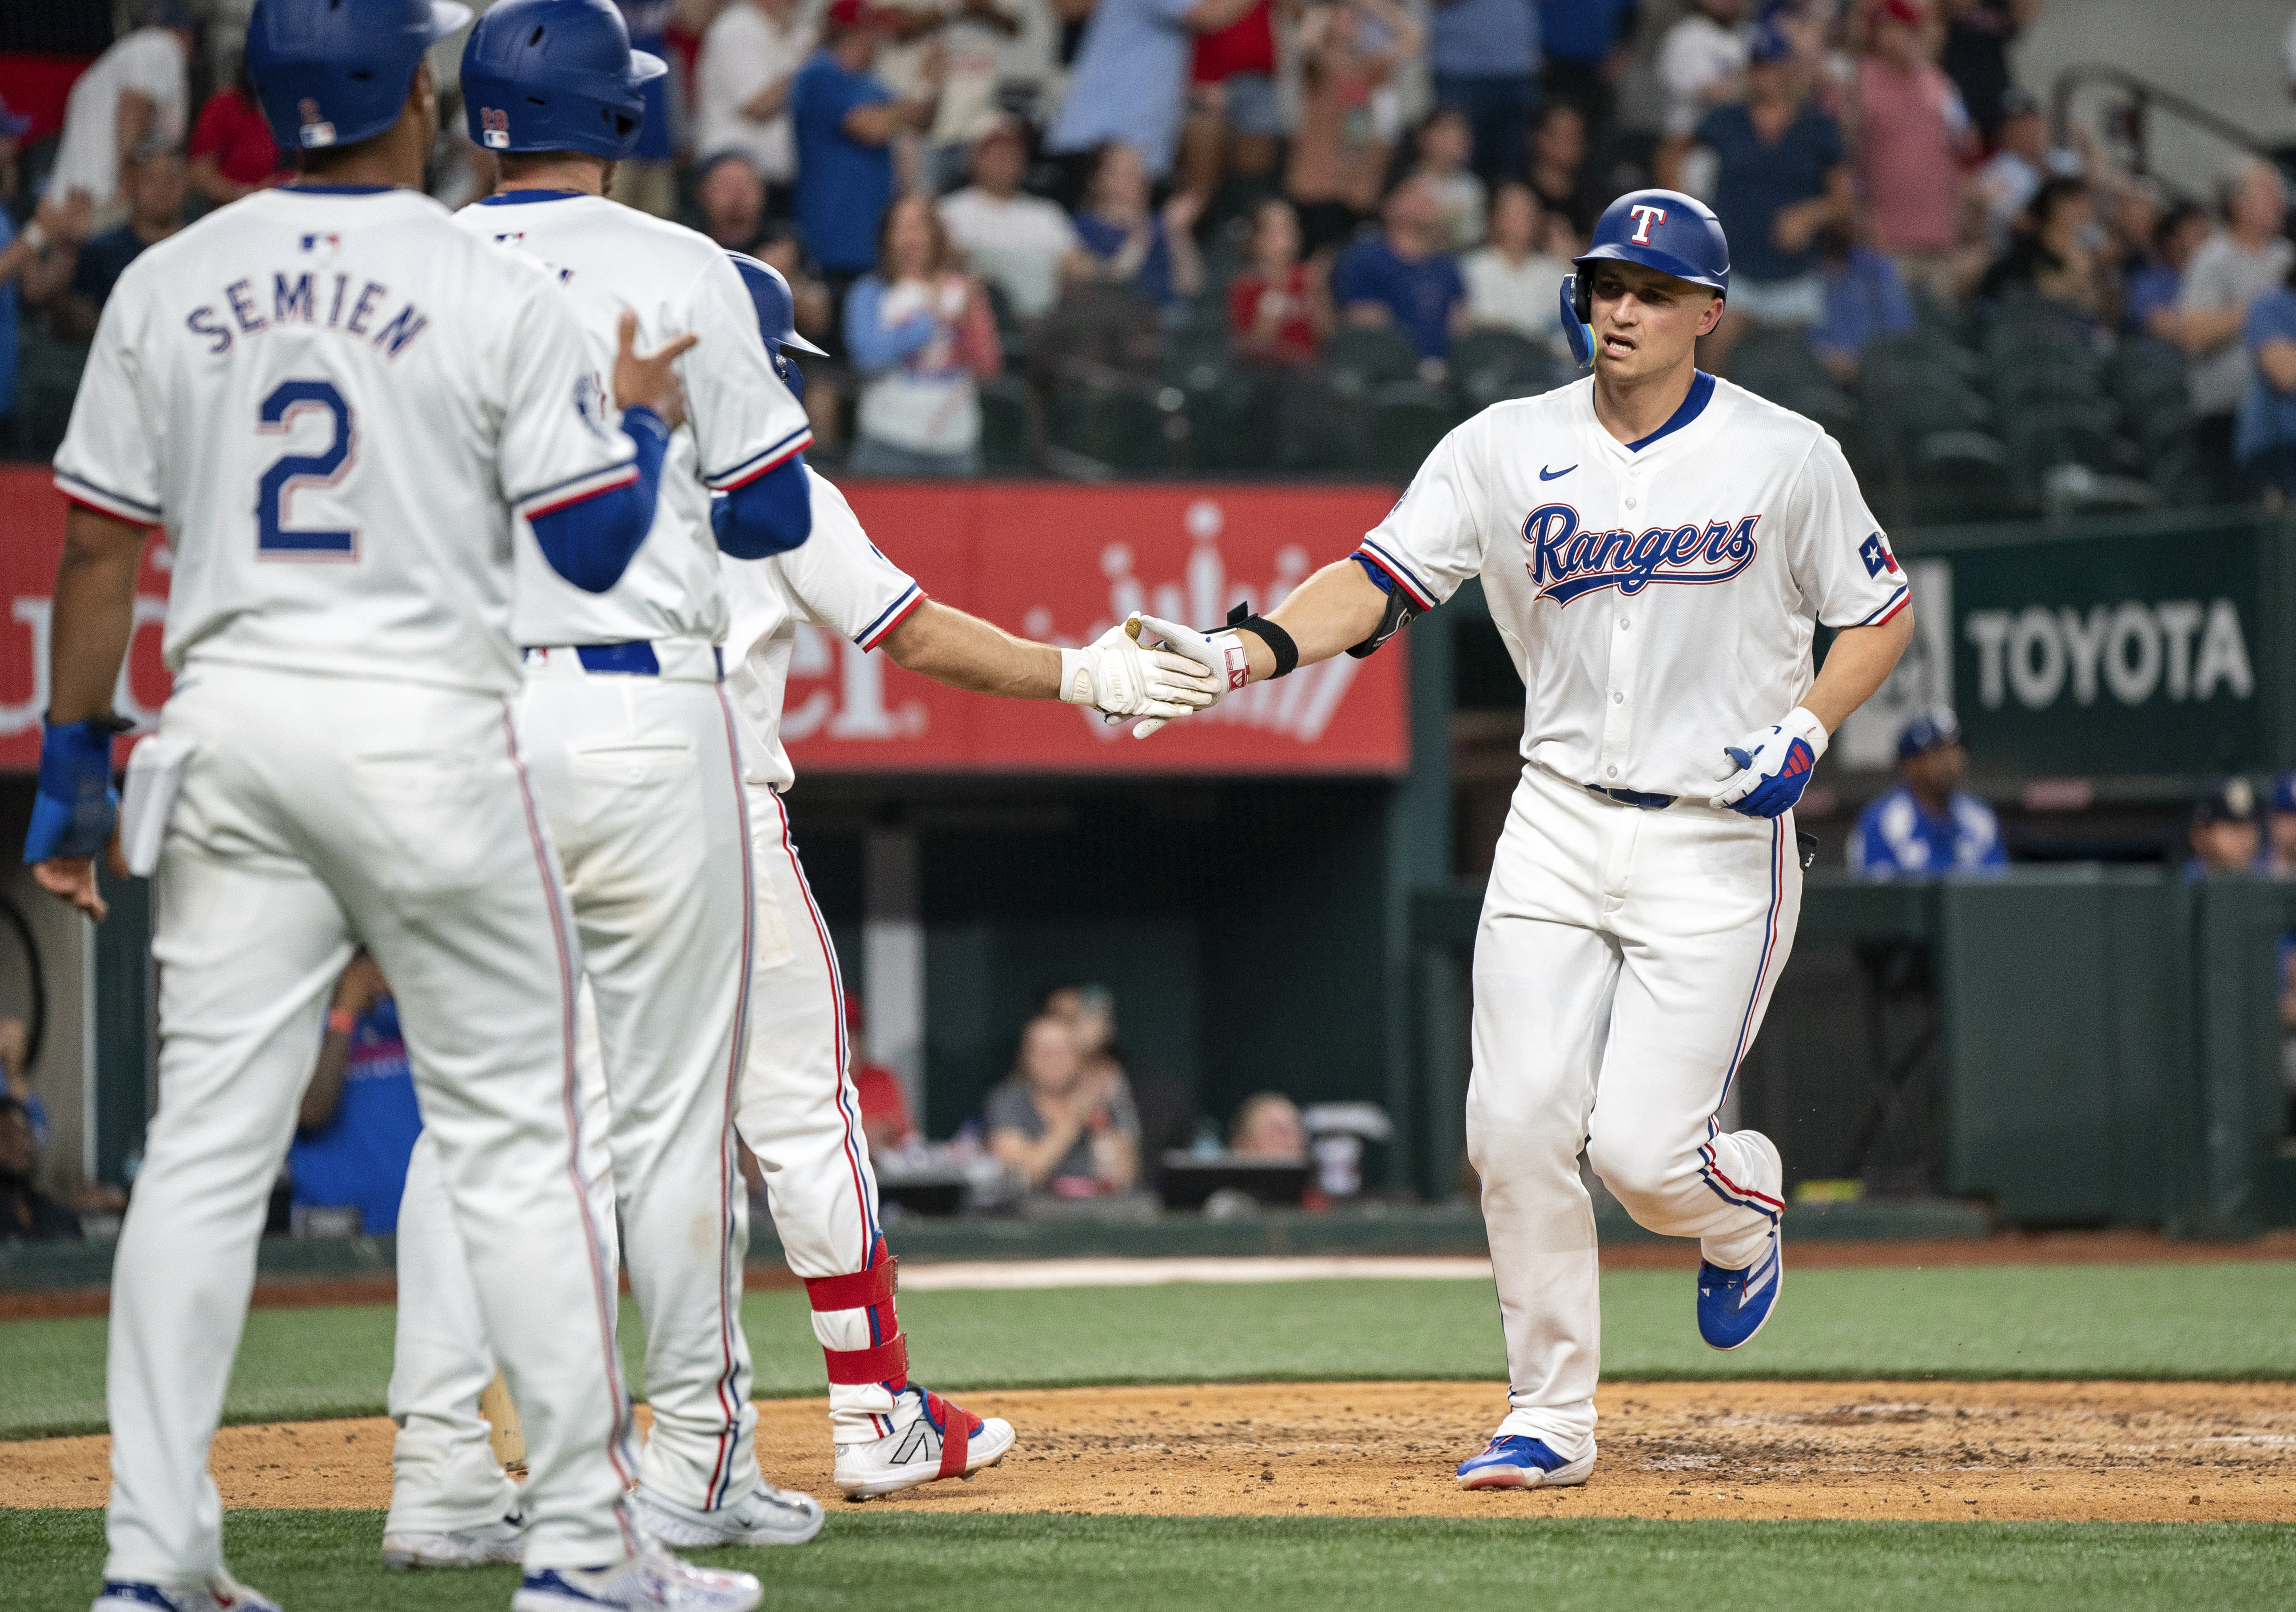 Seager hits 7th homer in 7 games as Rangers beat Diamondbacks 4-2 in World Series rematch